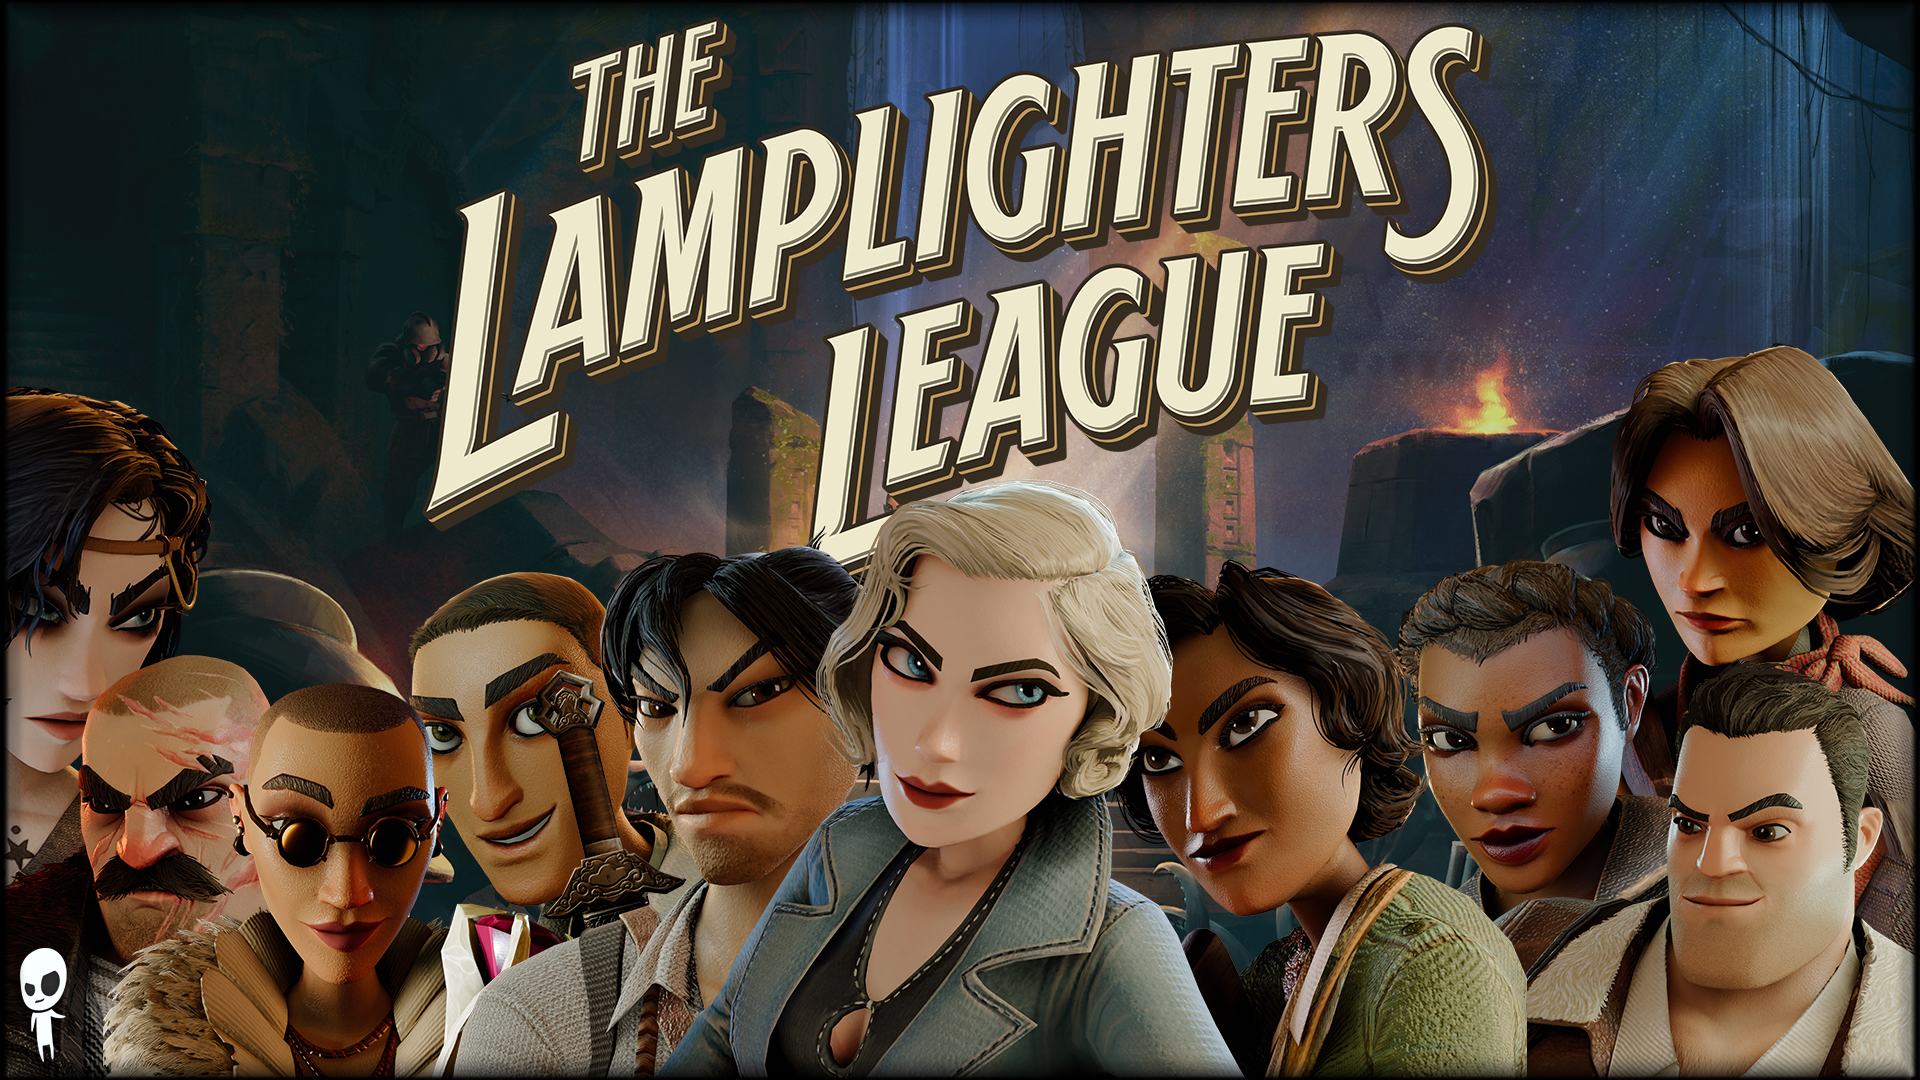 Harebrained Schemes And Paradox Interactive Part Ways After The Lamplighters League ‘Disaster’